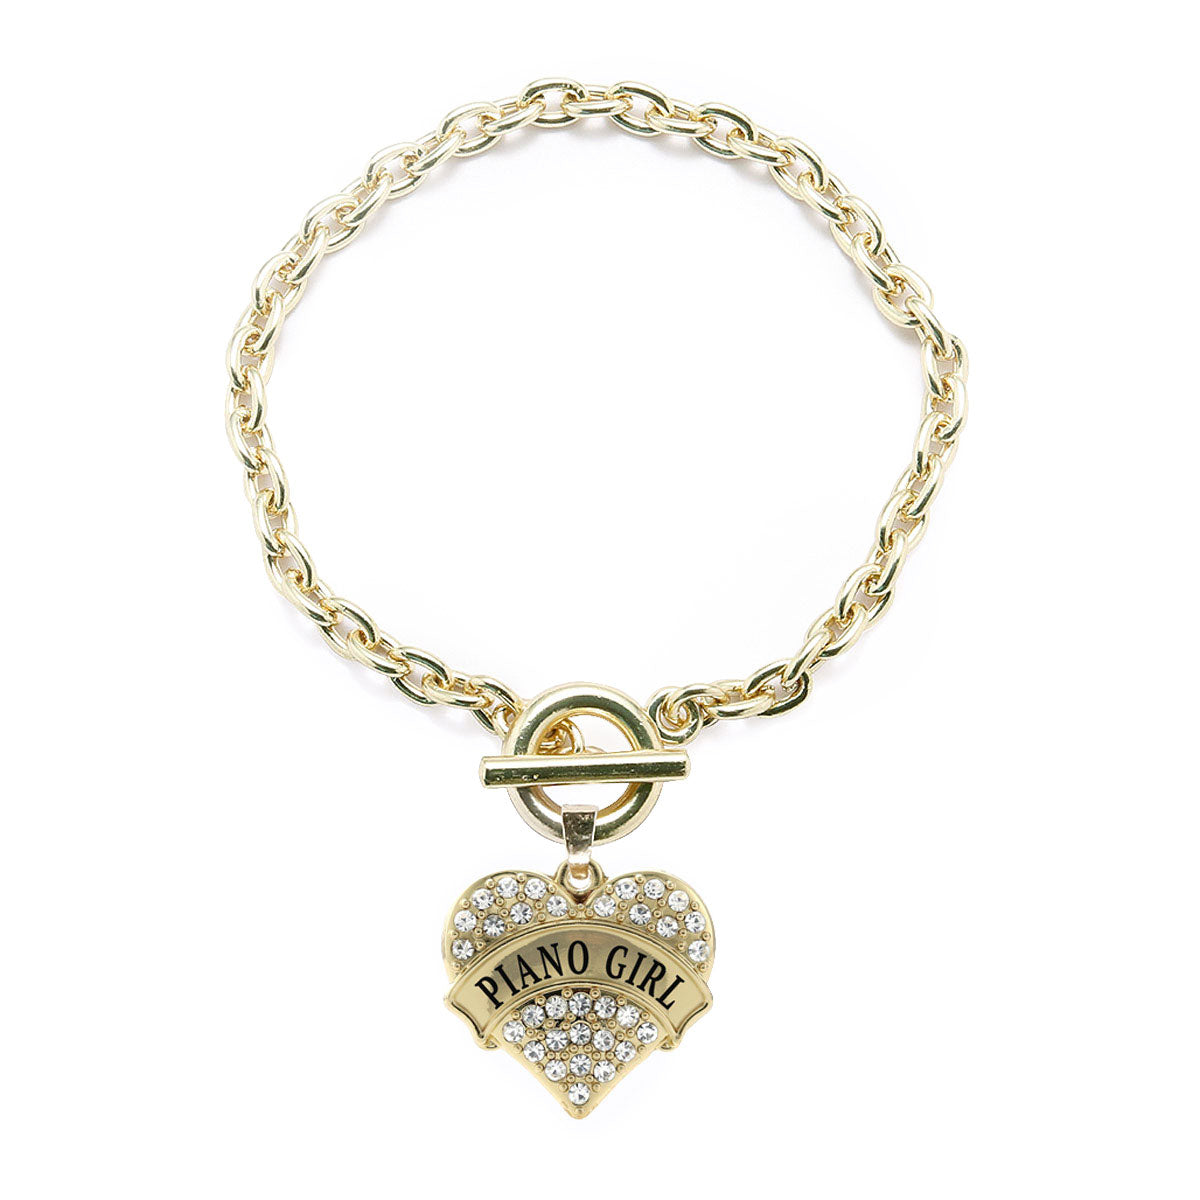 Gold Piano Girl Pave Heart Charm Toggle Bracelet